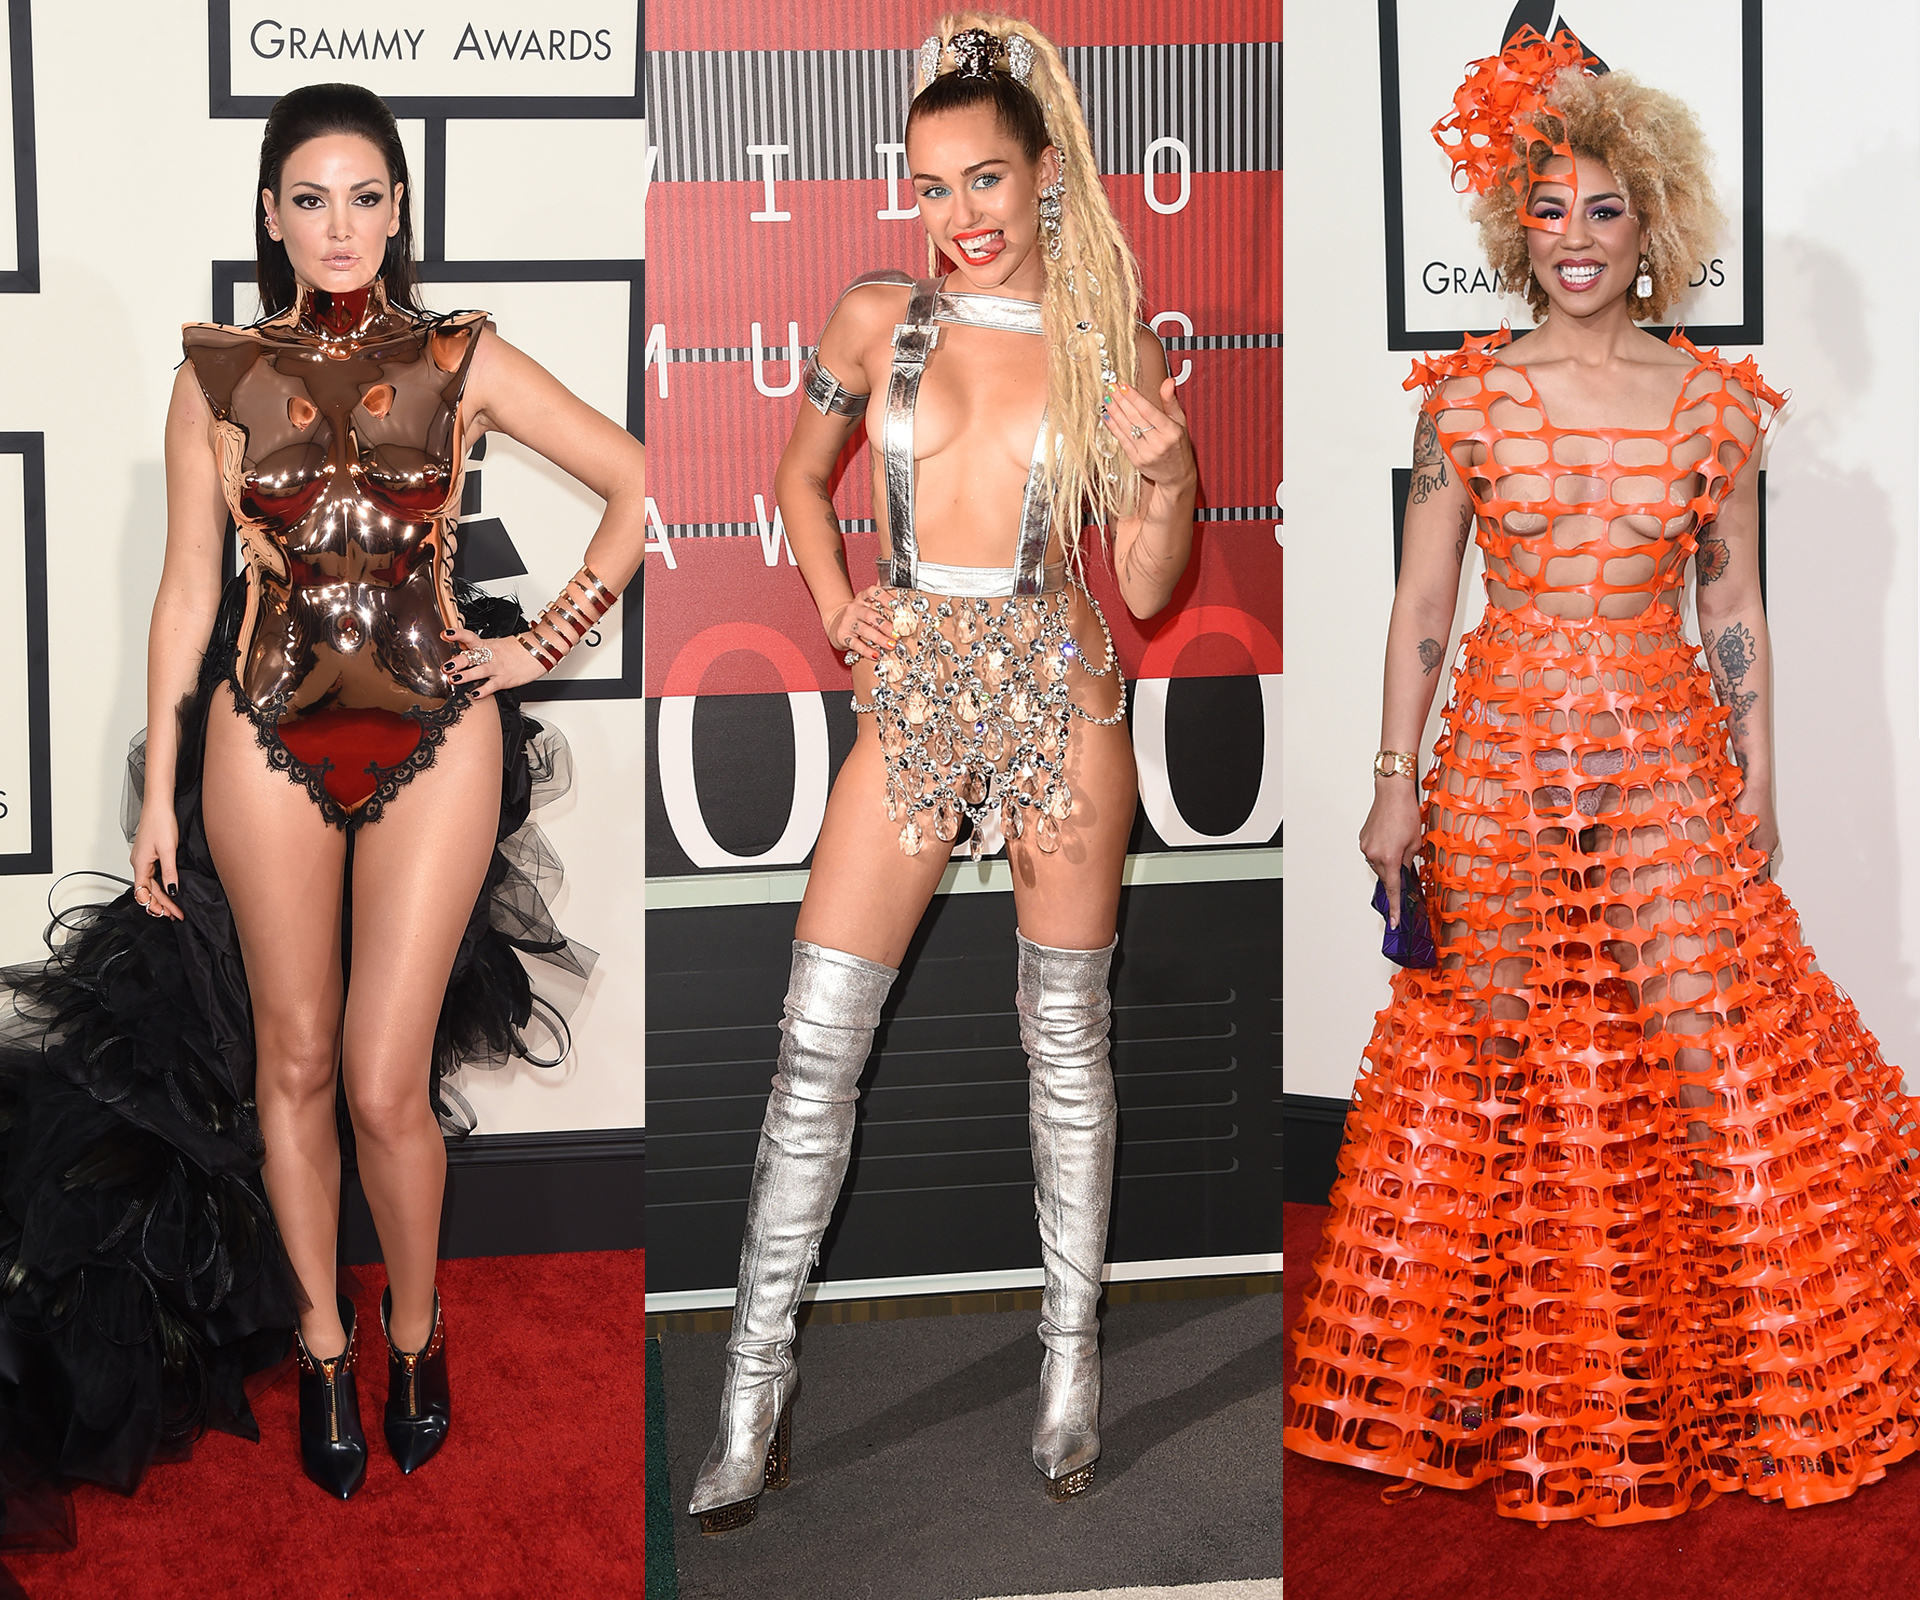 The worst dresses of 2015